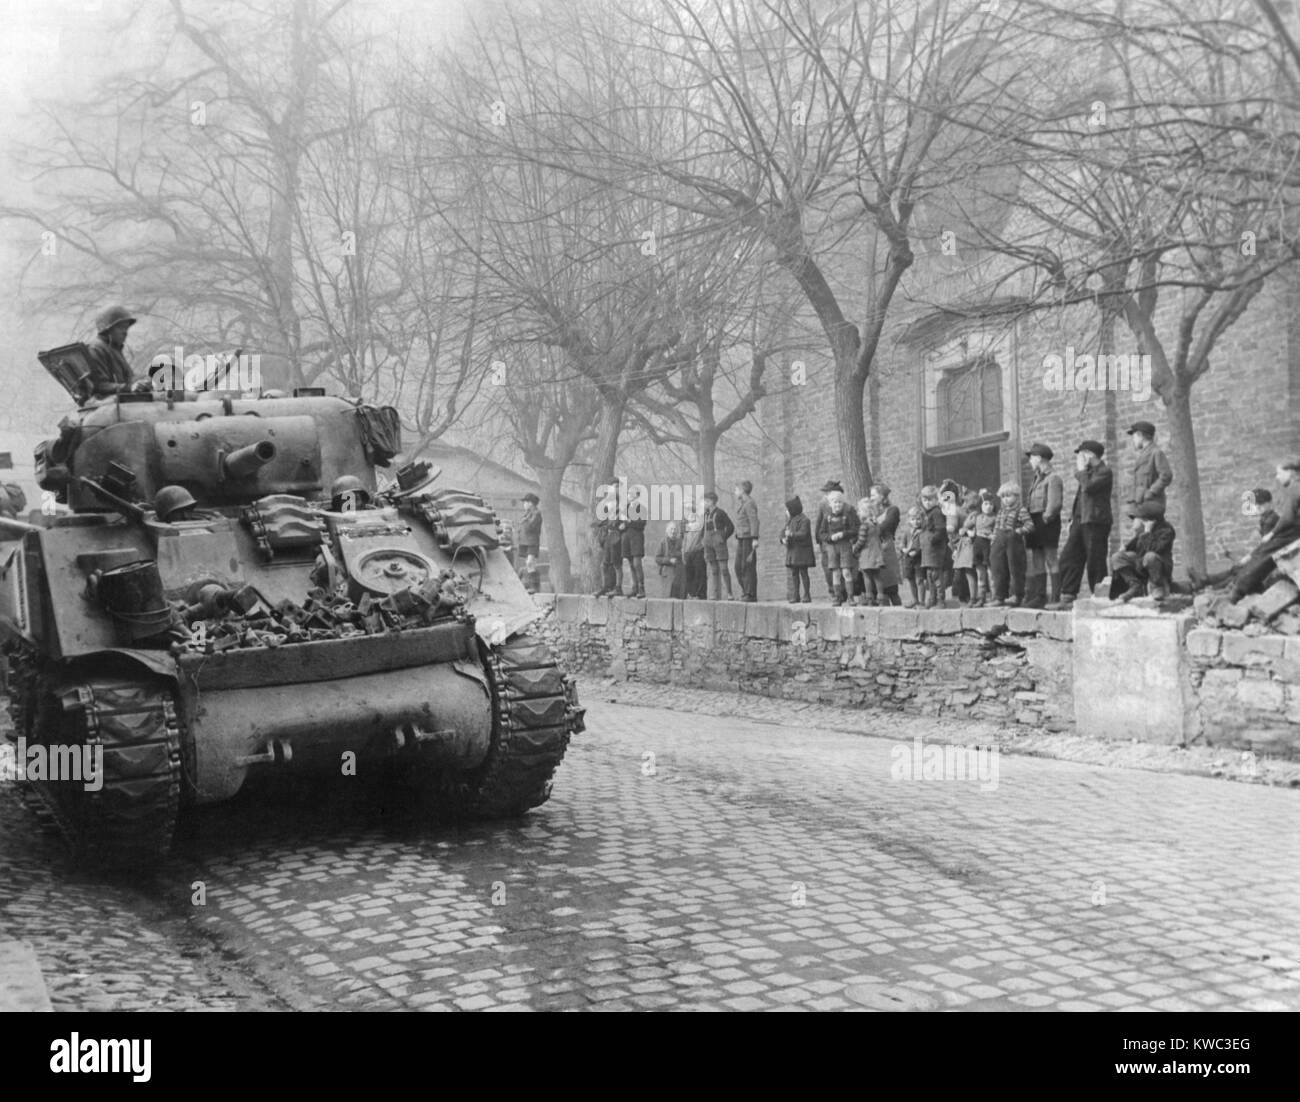 German children watch U.S. Tanks of 87th Division, Third U.S. Army, enter town of Kobern, Germany. March 16, 1945. Kobern, was on the Moselle River five miles southwest of Coblenz. World War 2 (BSLOC 2015 13 70) Stock Photo